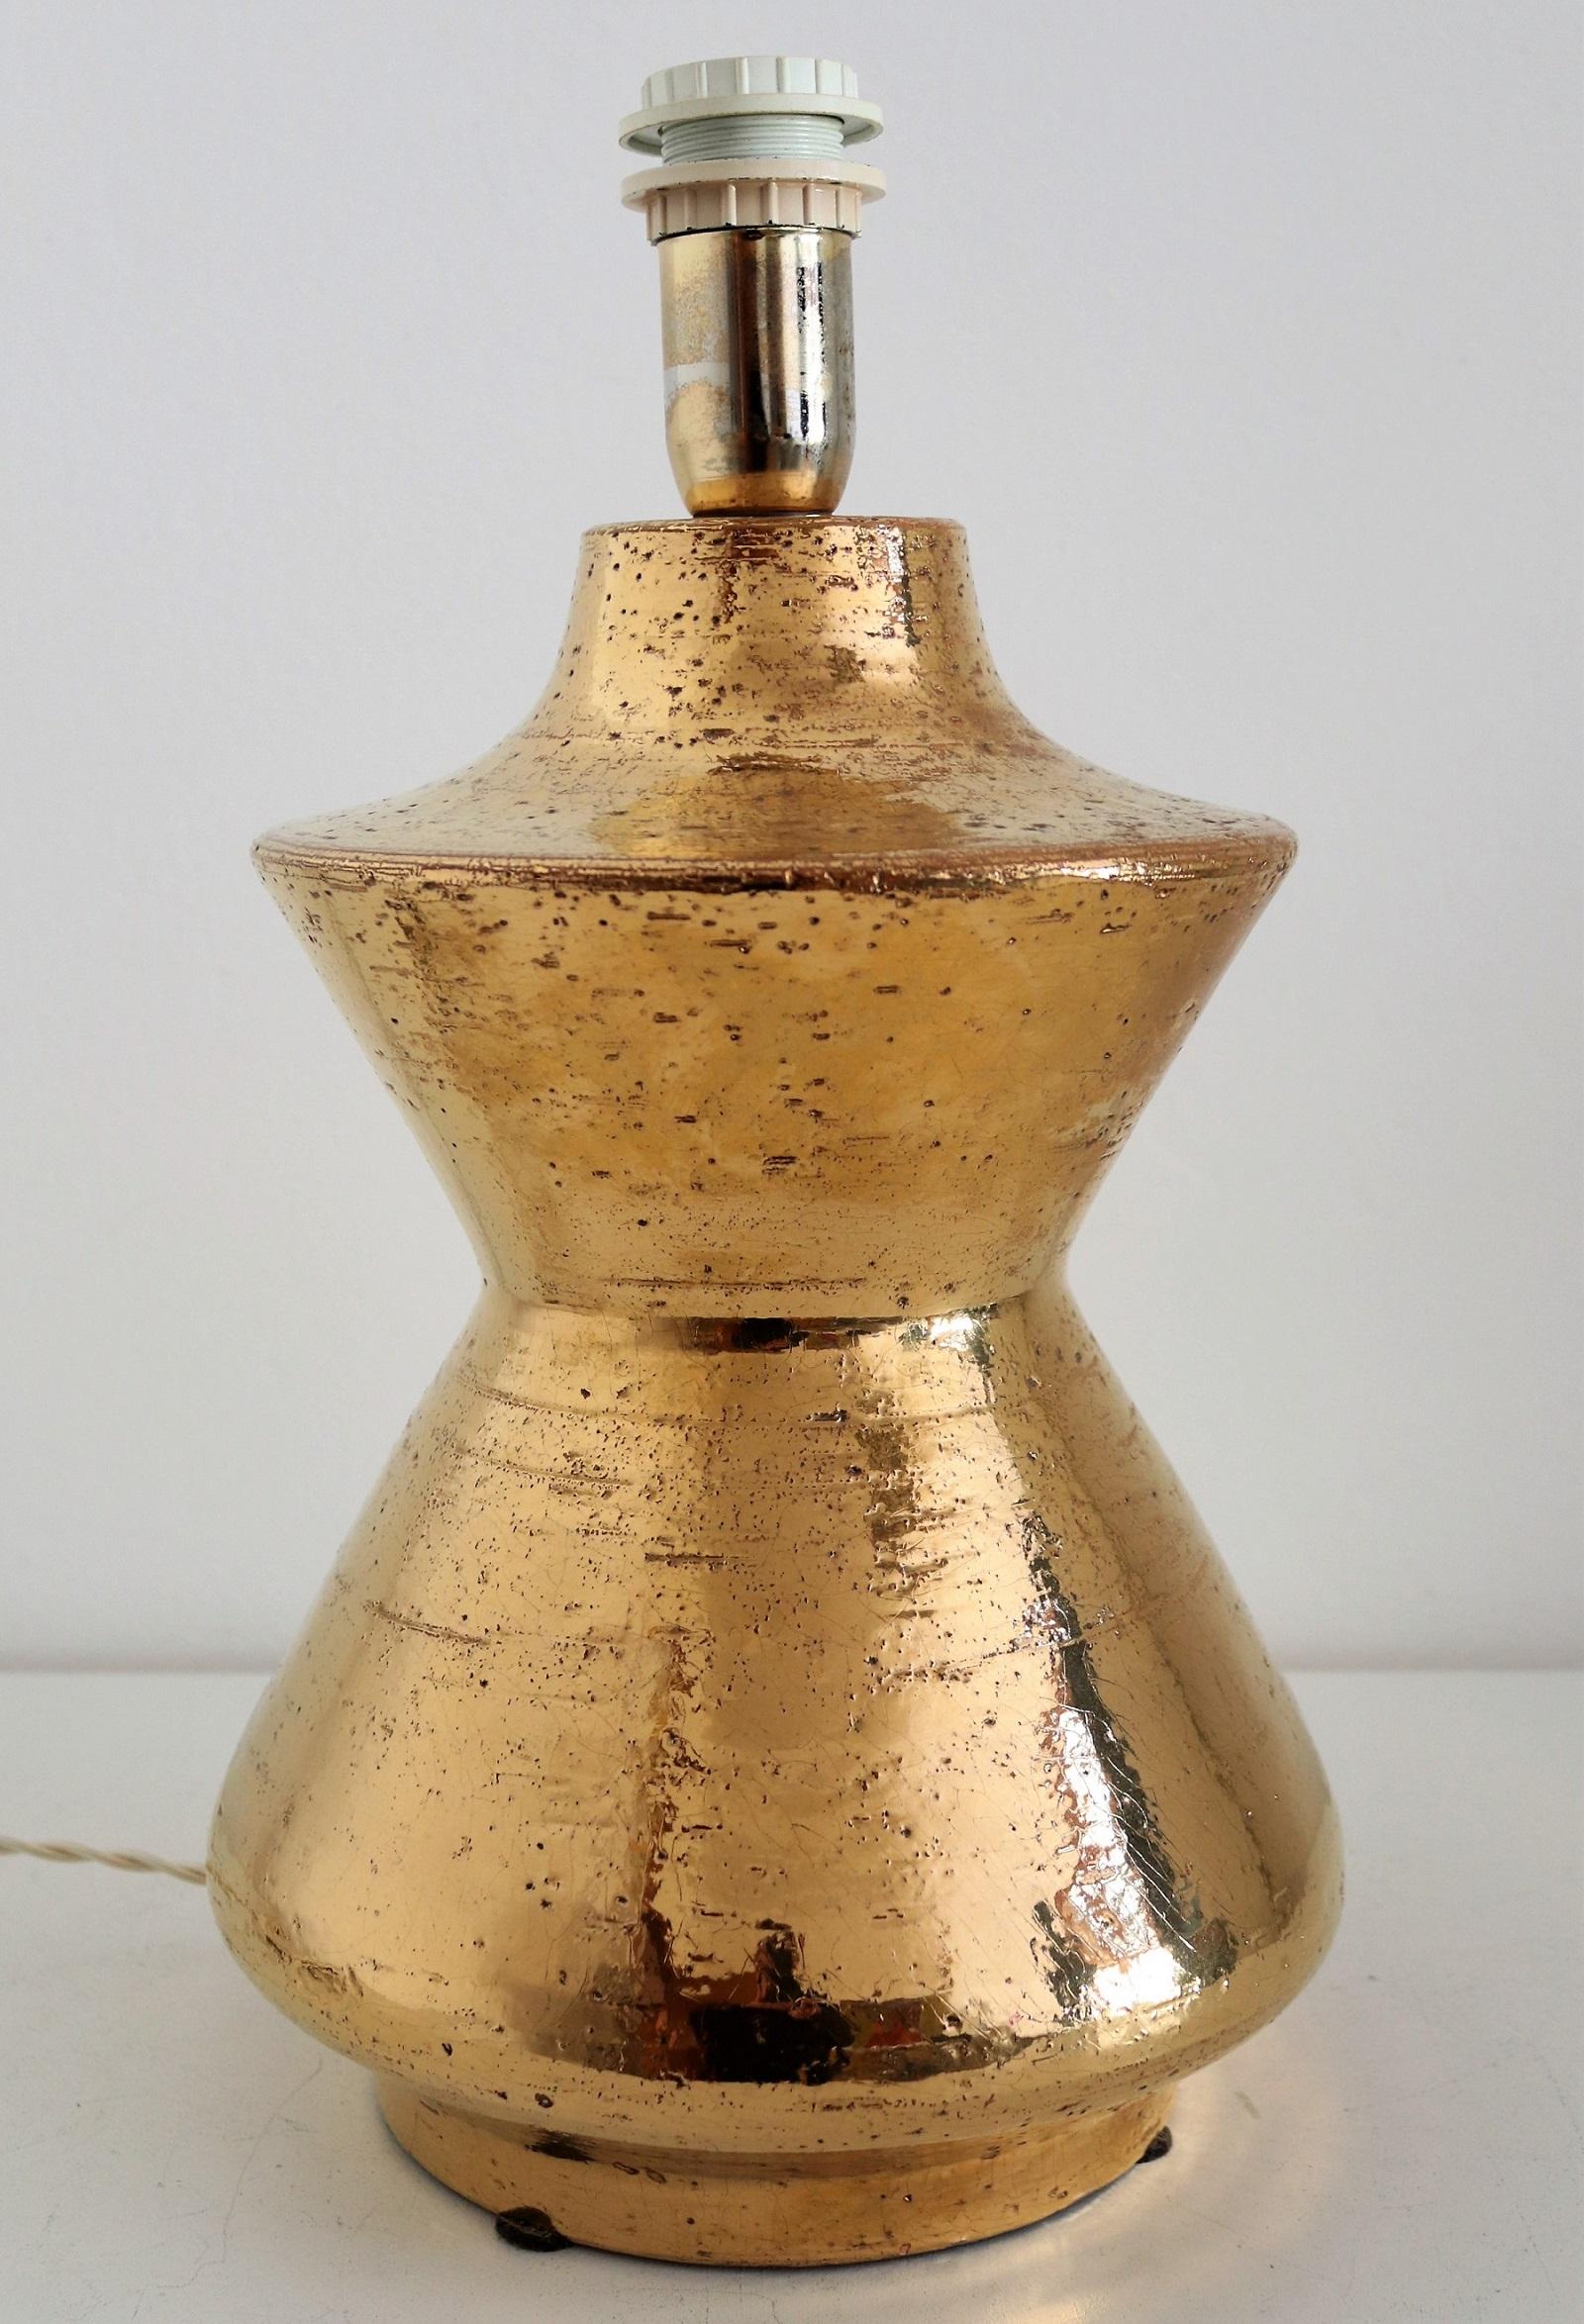 Beautiful and shiny ceramic table lamp designed and made under the artistic guidance from Aldo Londi in the 1970s for Bitossi.
This heavy, organic ceramic body is made in gold metallic glaze and a beautiful eye-catcher.
The lamp has been equipped